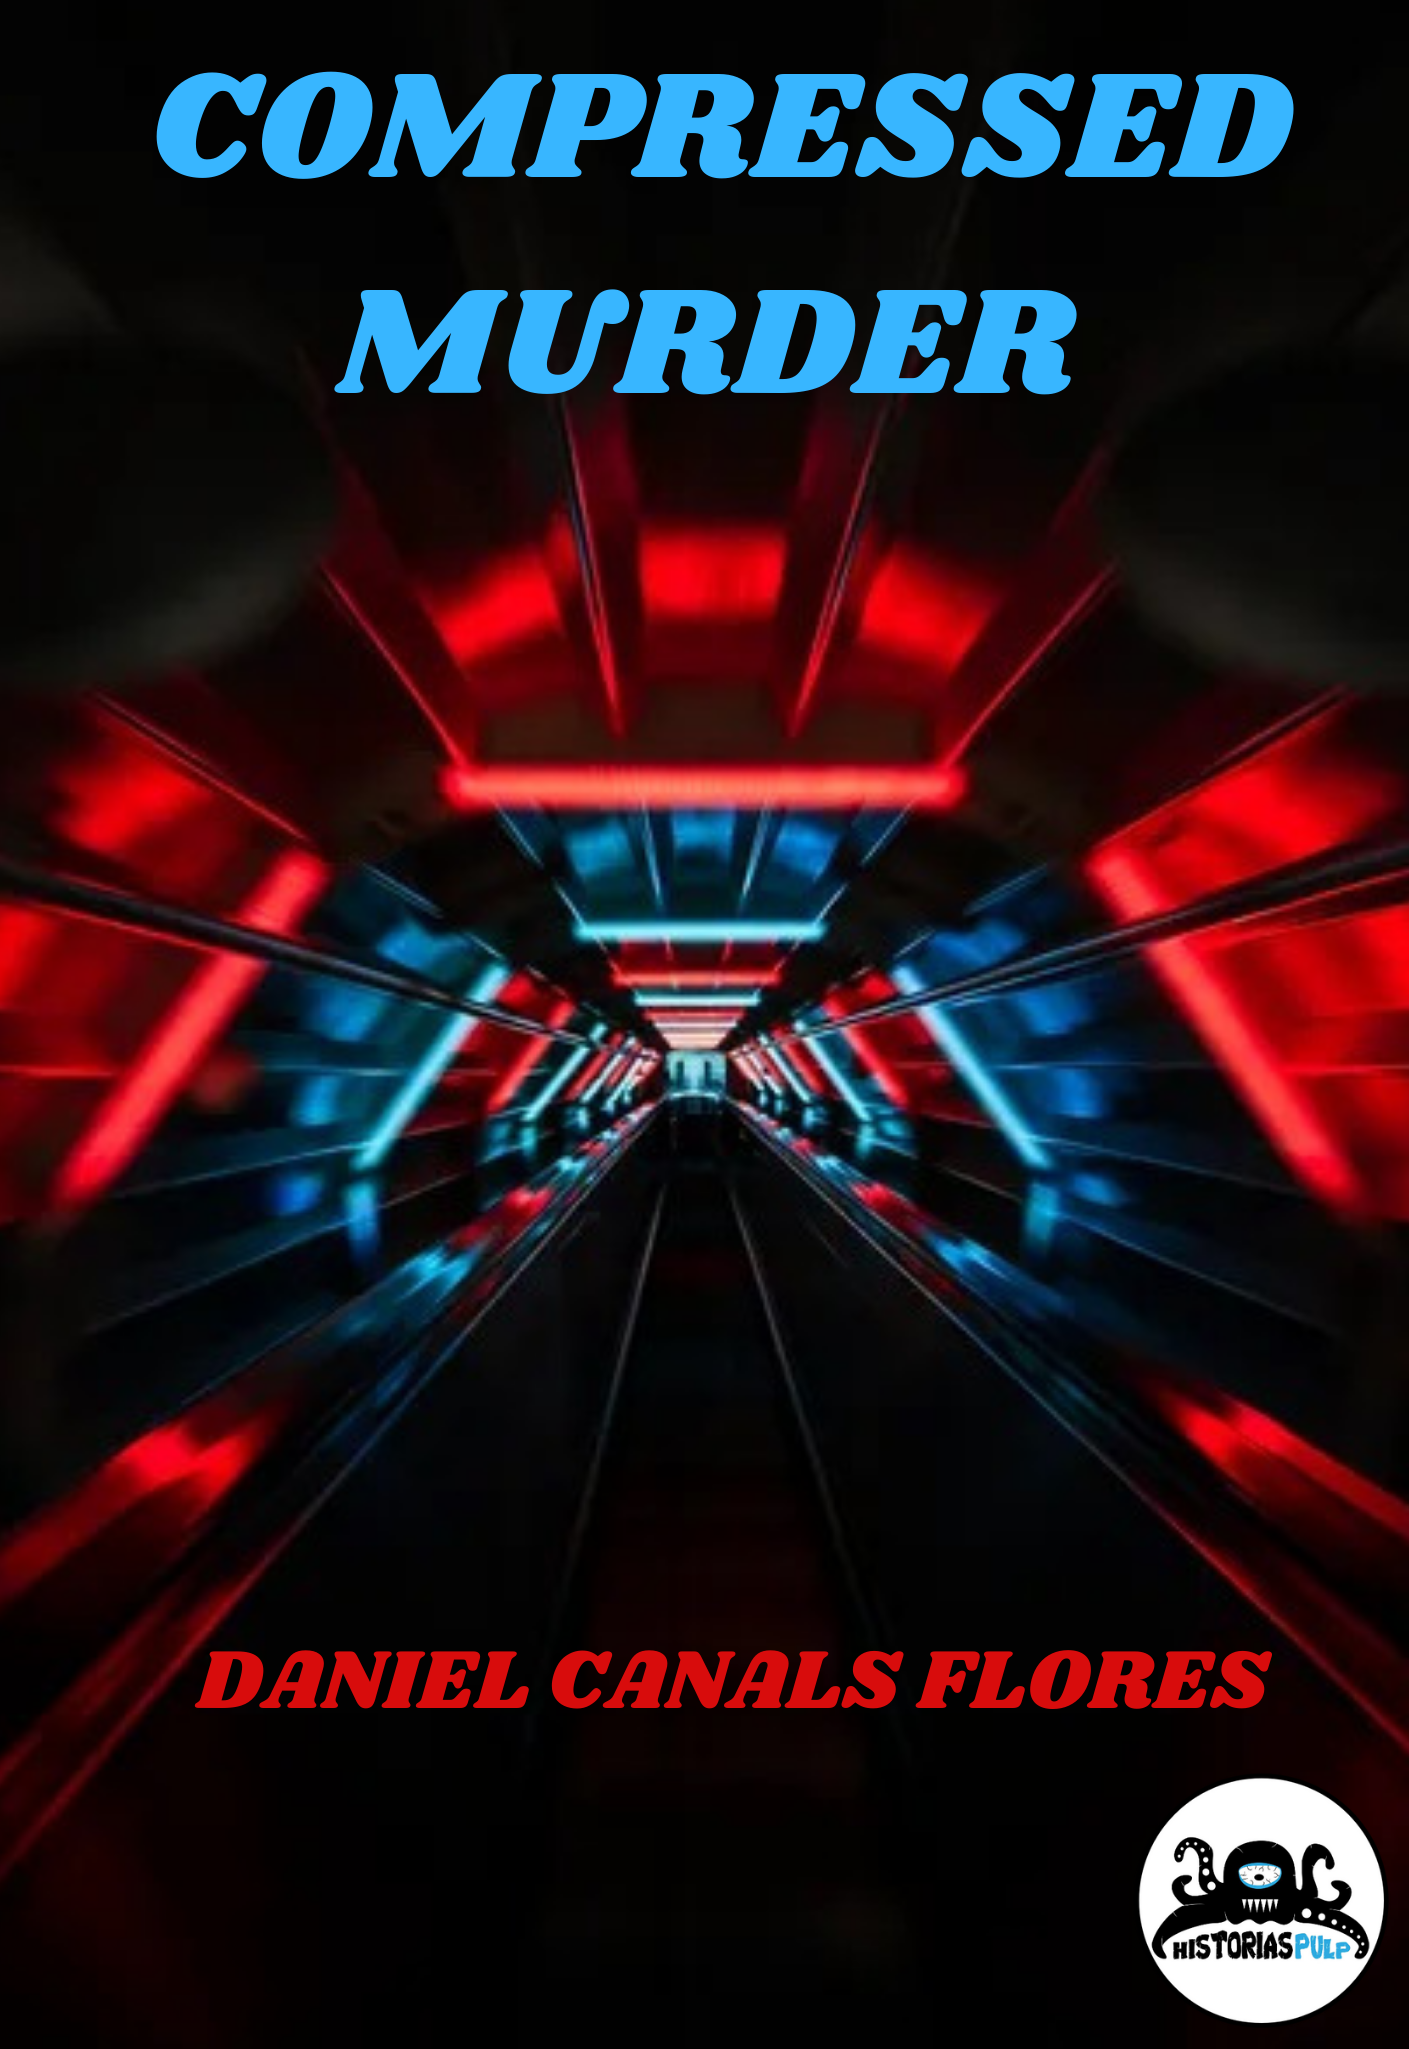 COMPRESSED MURDER, by Daniel Canals Flores